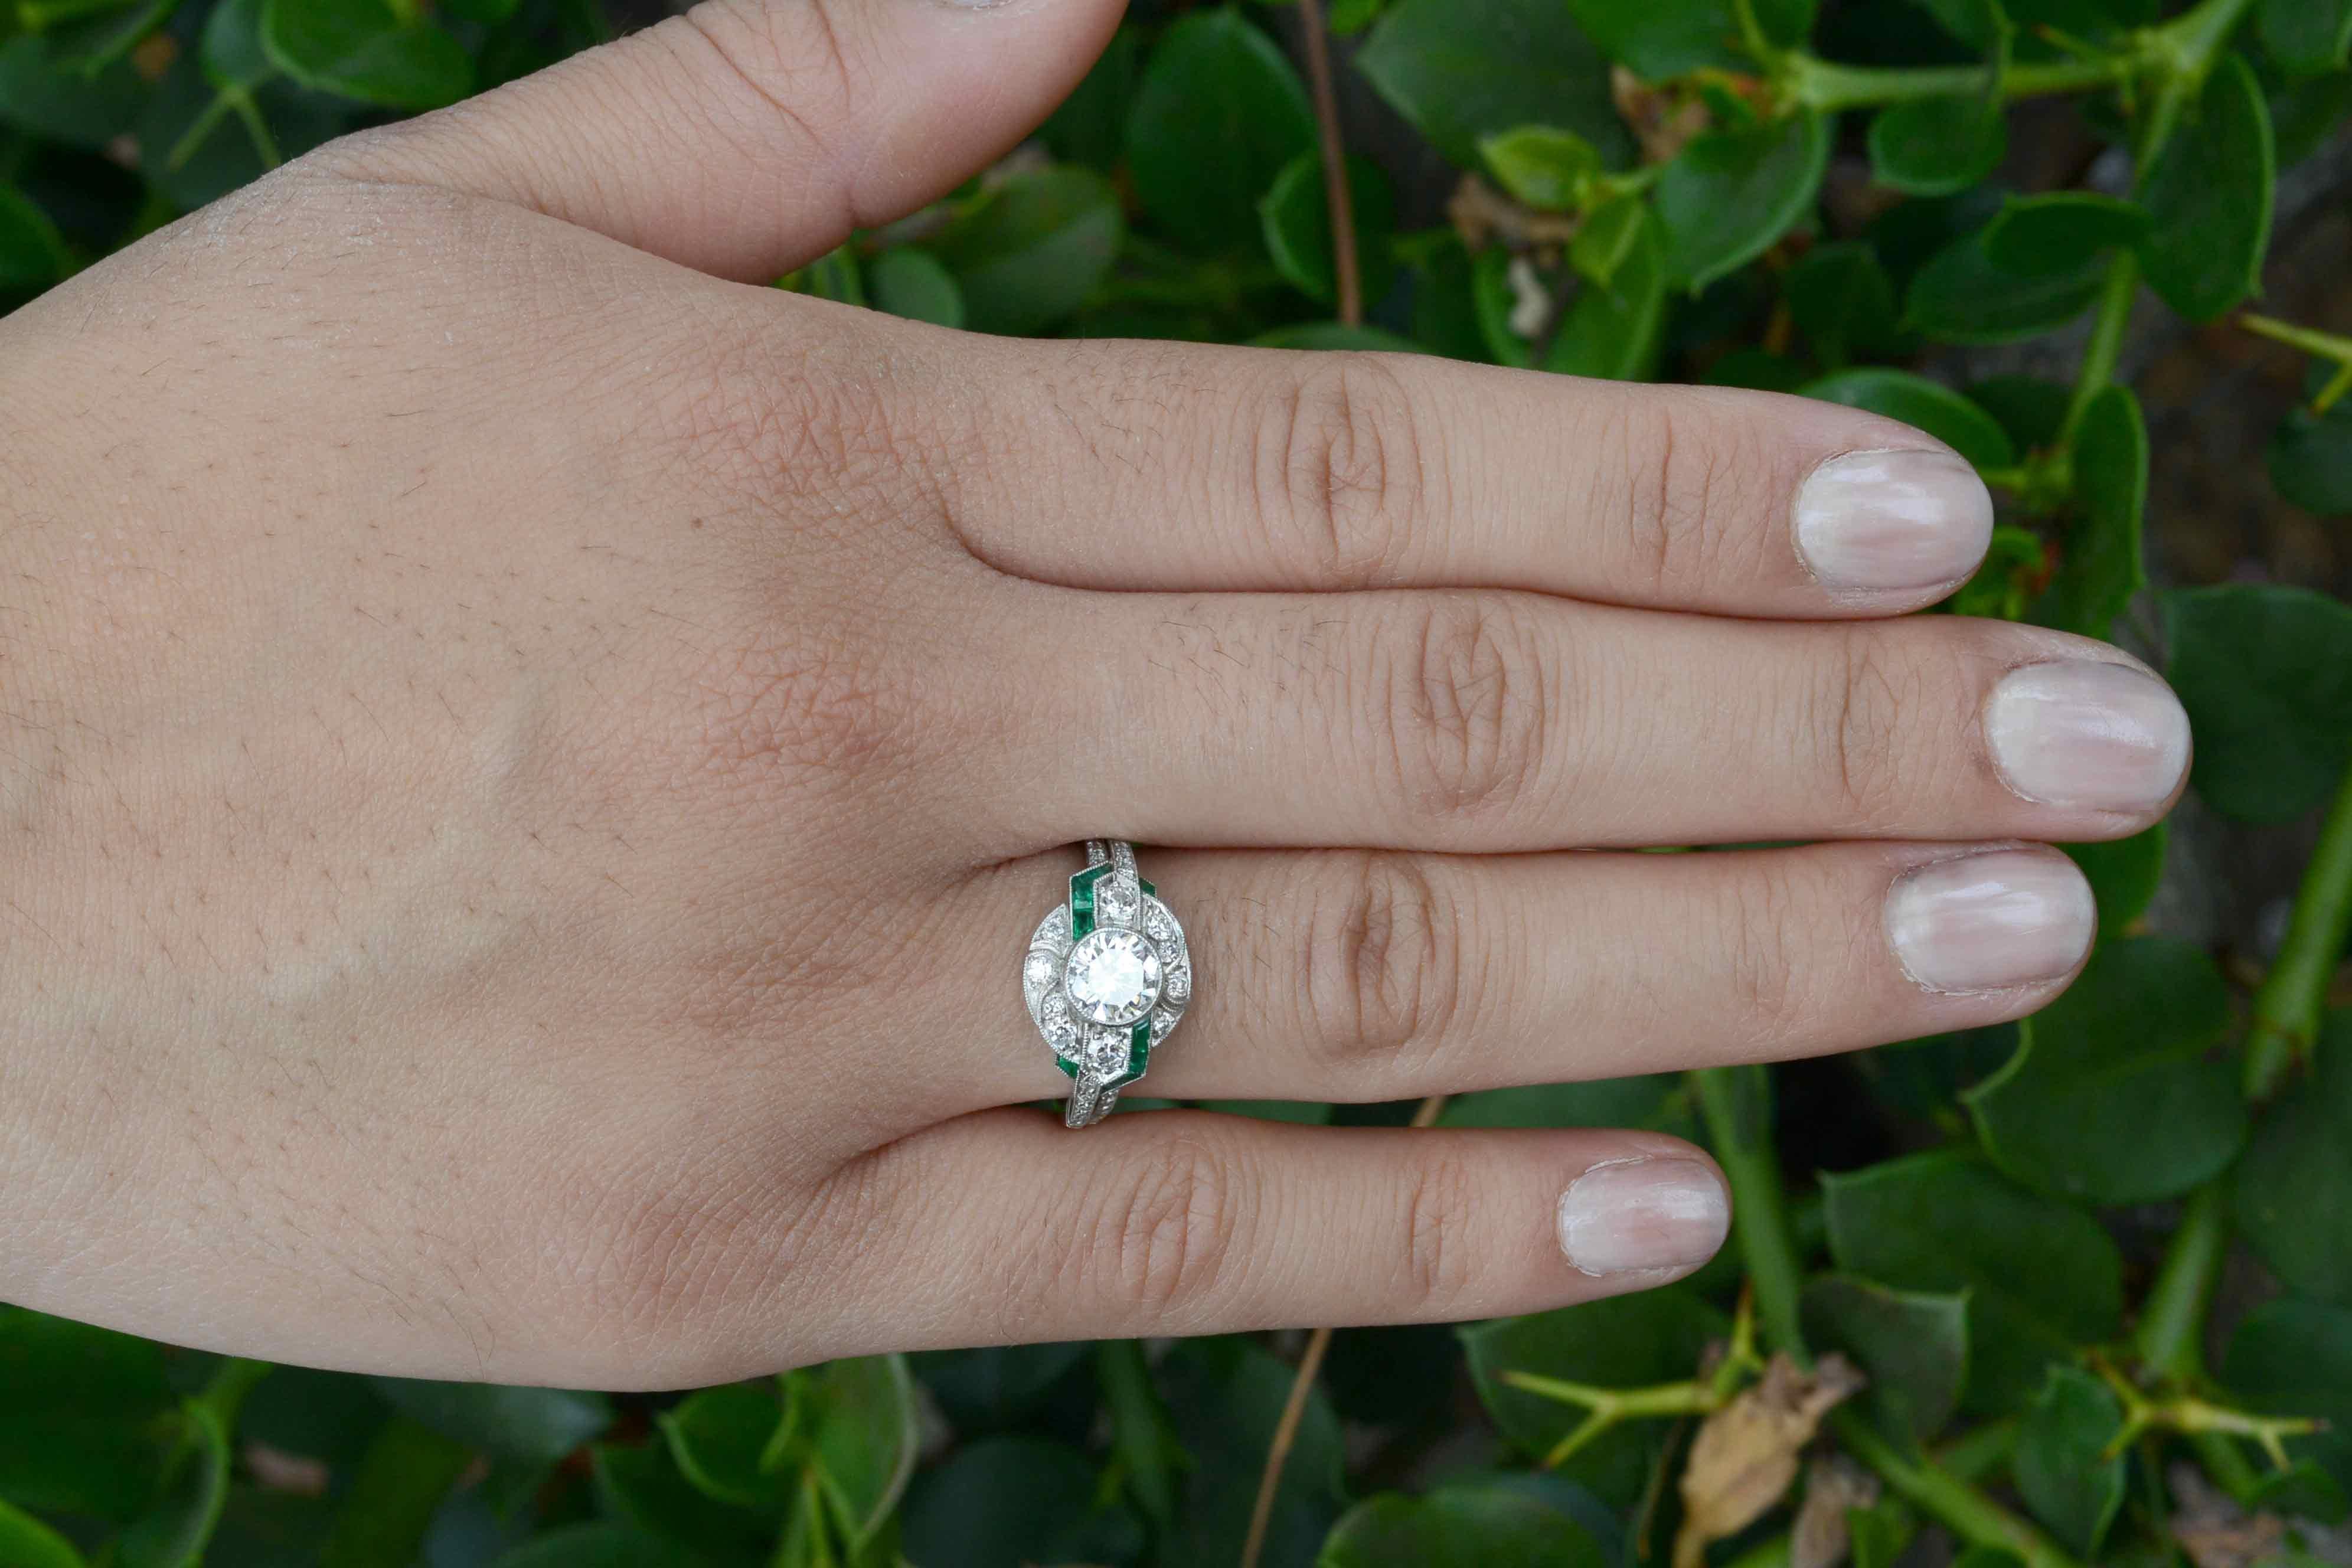 With a fiery sparkle and brilliance that will light up a room, the large, near 1 carat diamond sits regally in a bezel accompanied by a symphony of French cut emerald accents and 38 old cut diamonds. The sleek and angular geometry of this Art Deco